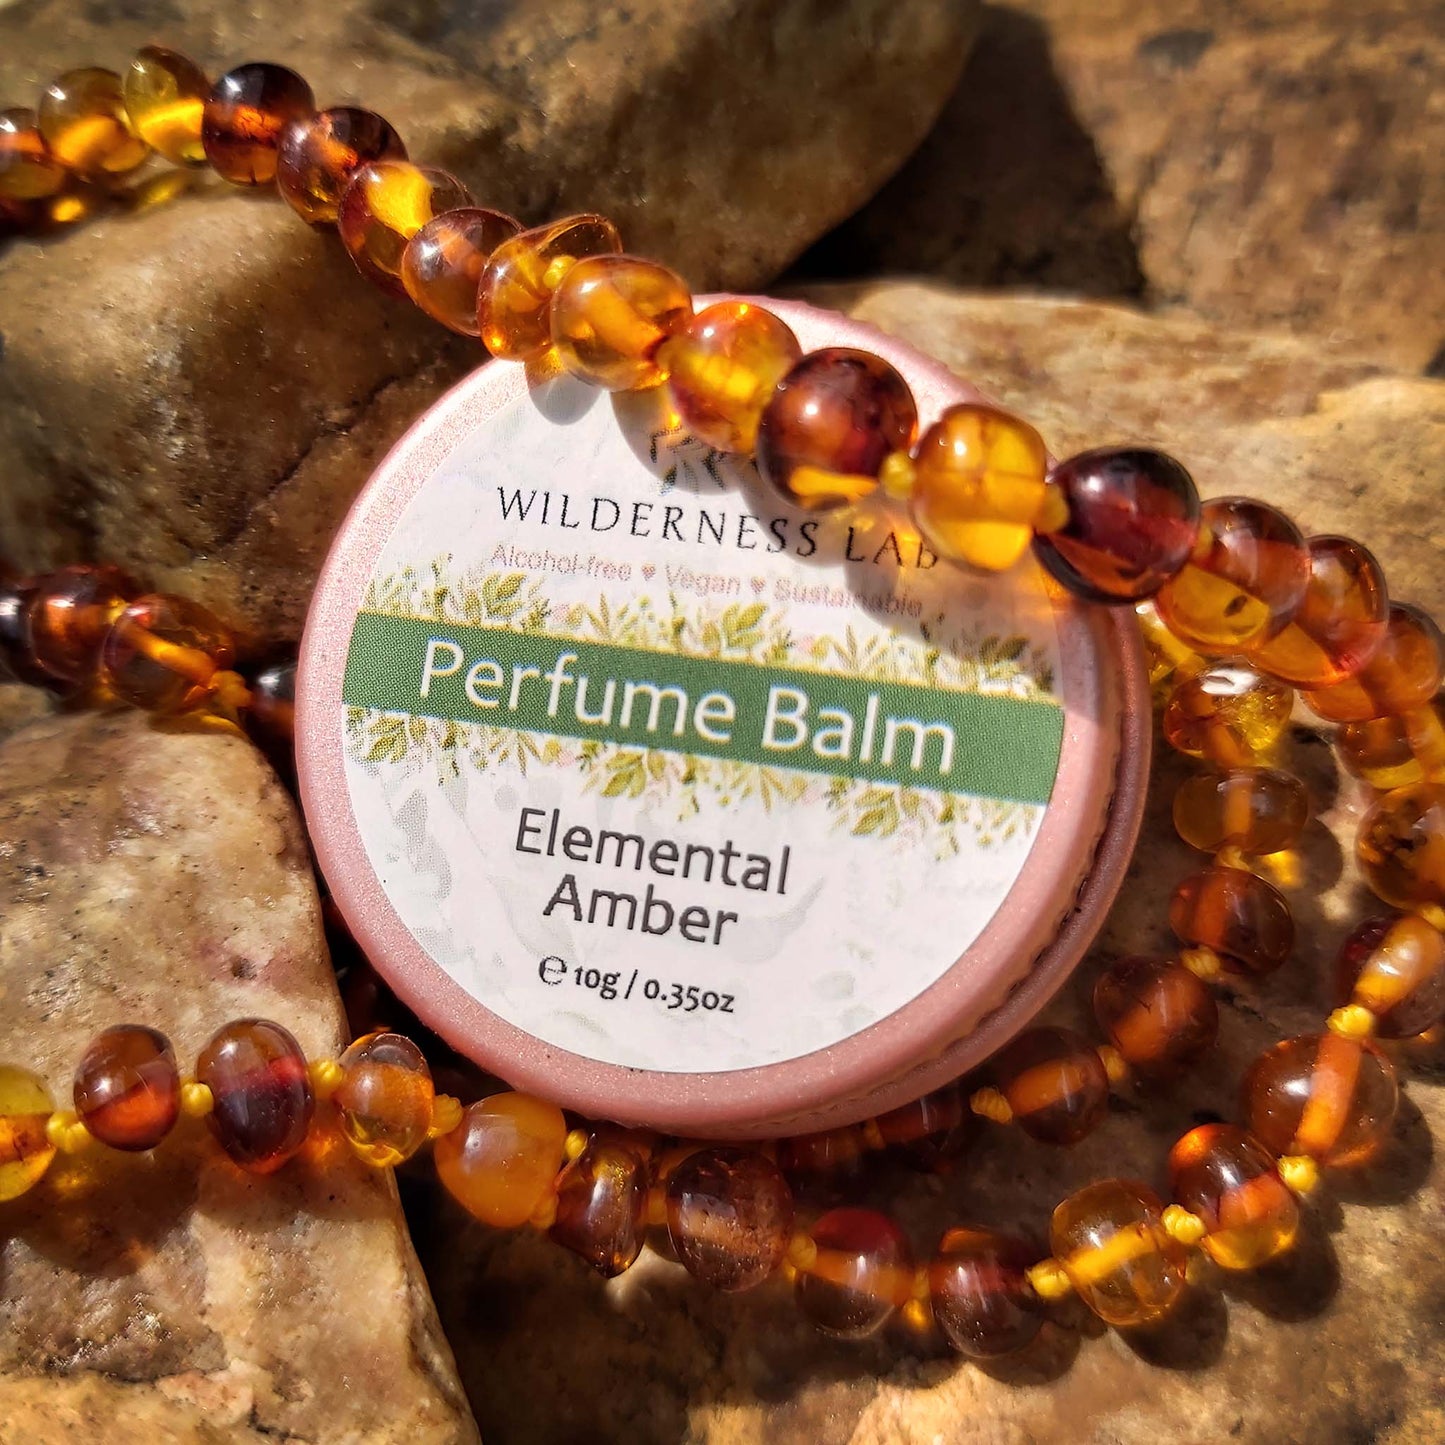 Elemental Amber Solid Perfume - natural vegan perfume balm with essential oils